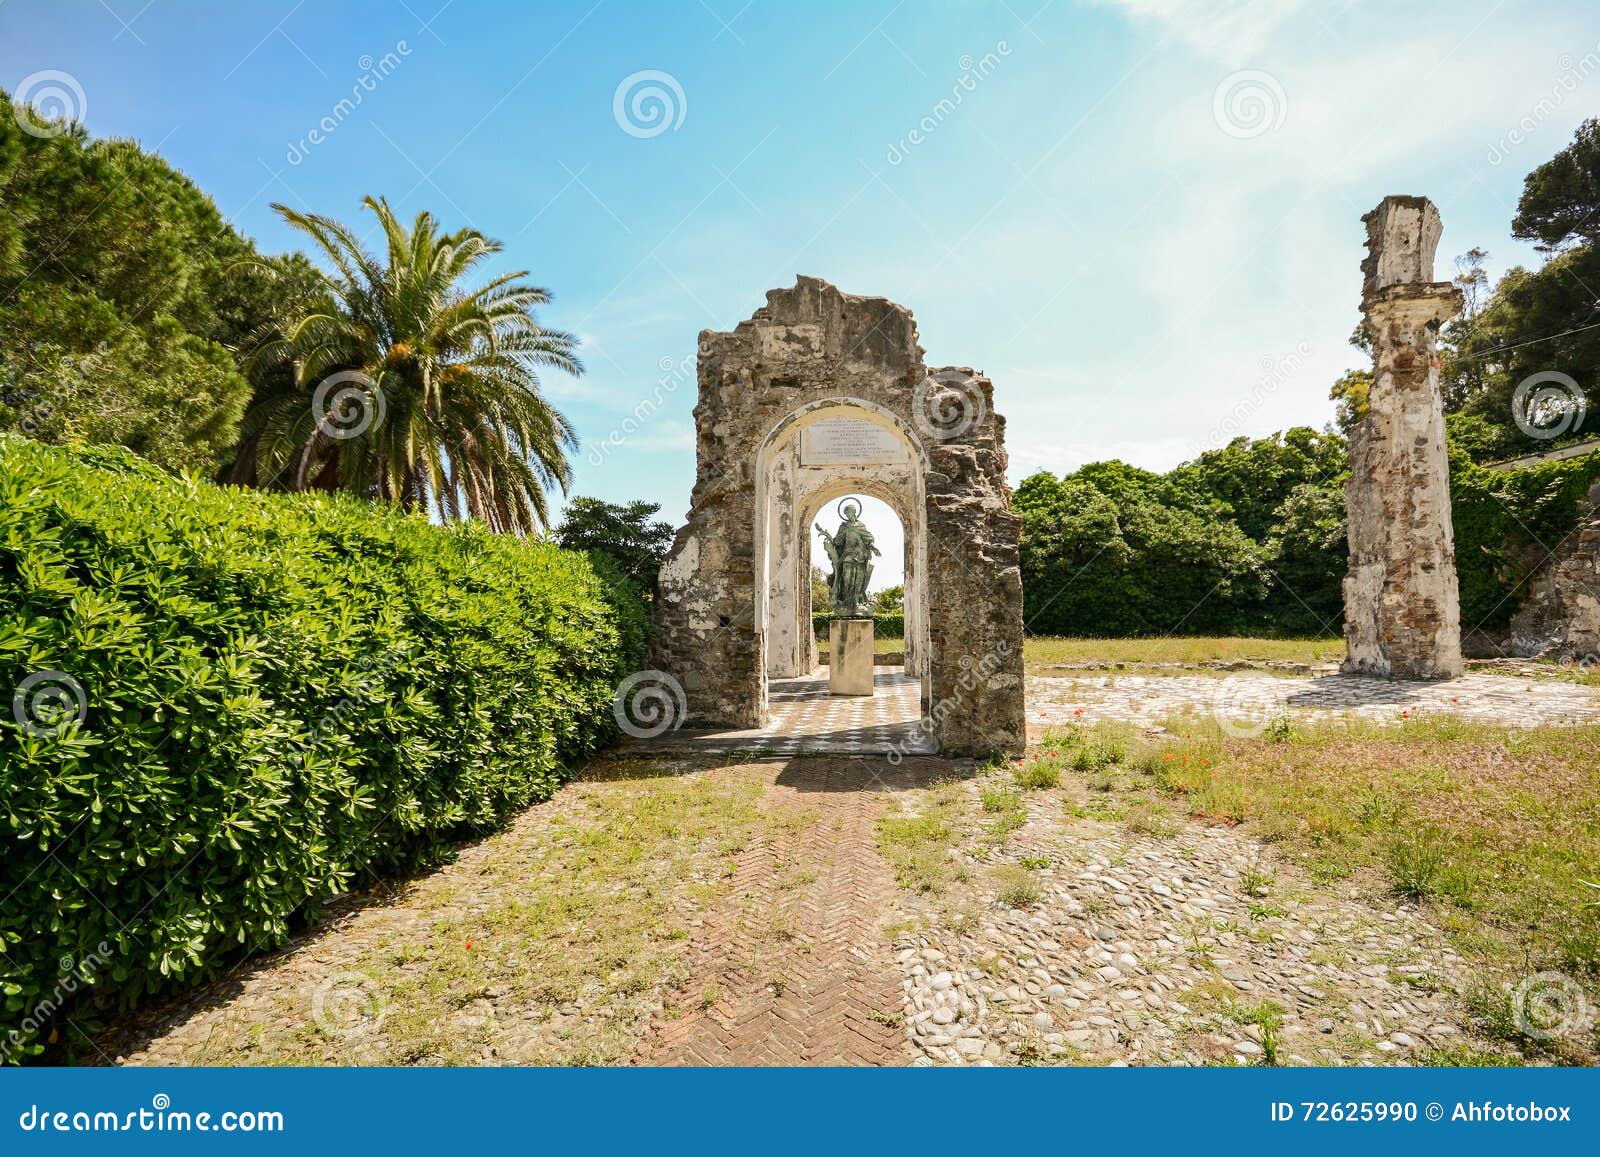 old roman architecture - ruins of an archway in sestri levante, liguria italy